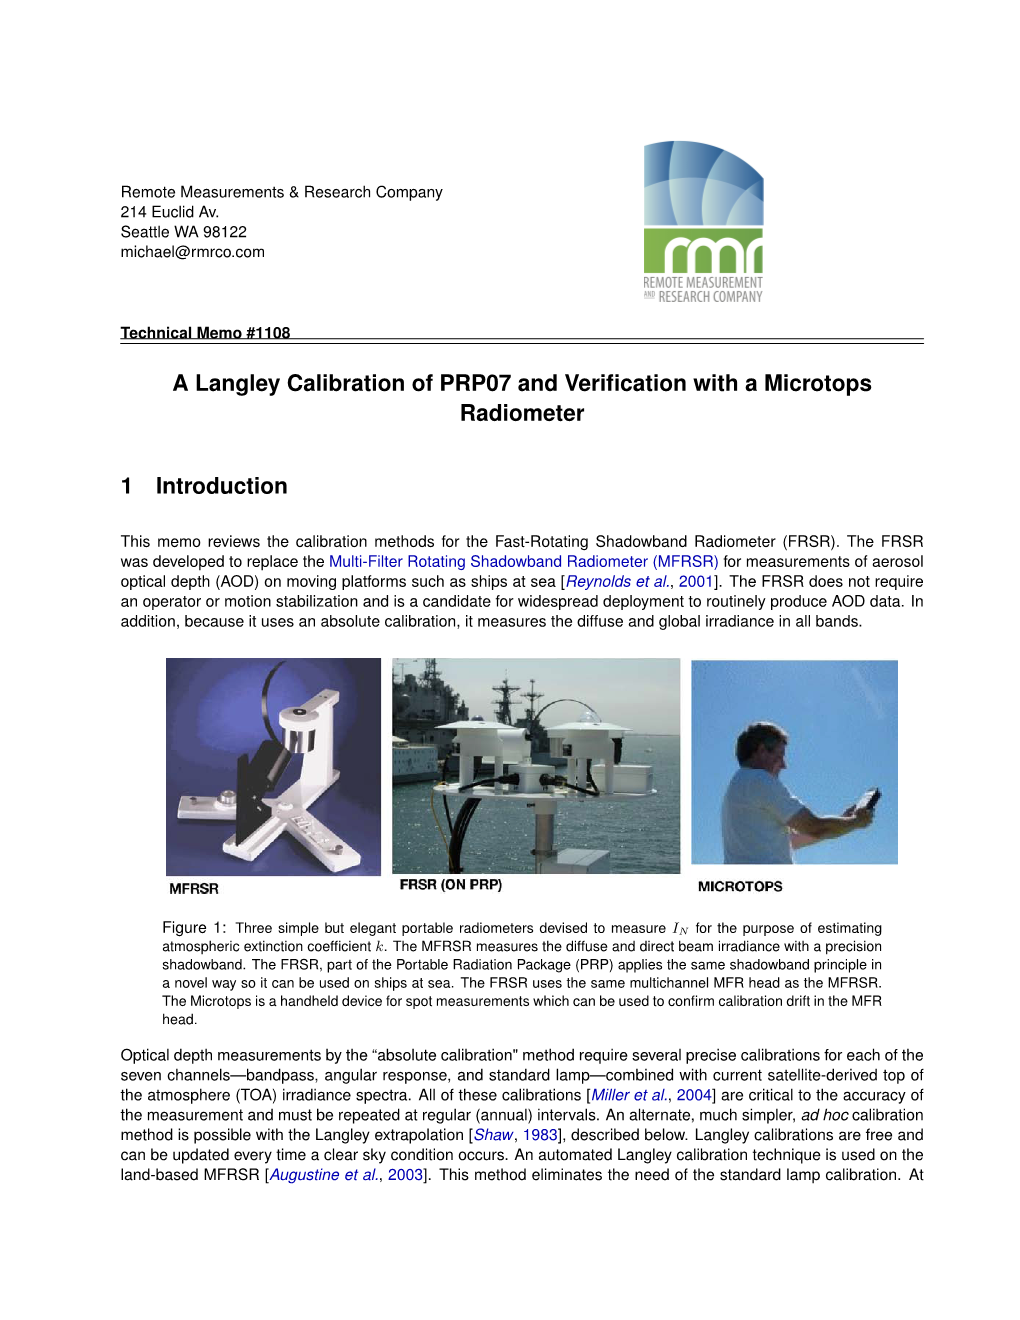 A Langley Calibration of PRP07 and Verification with a Microtops